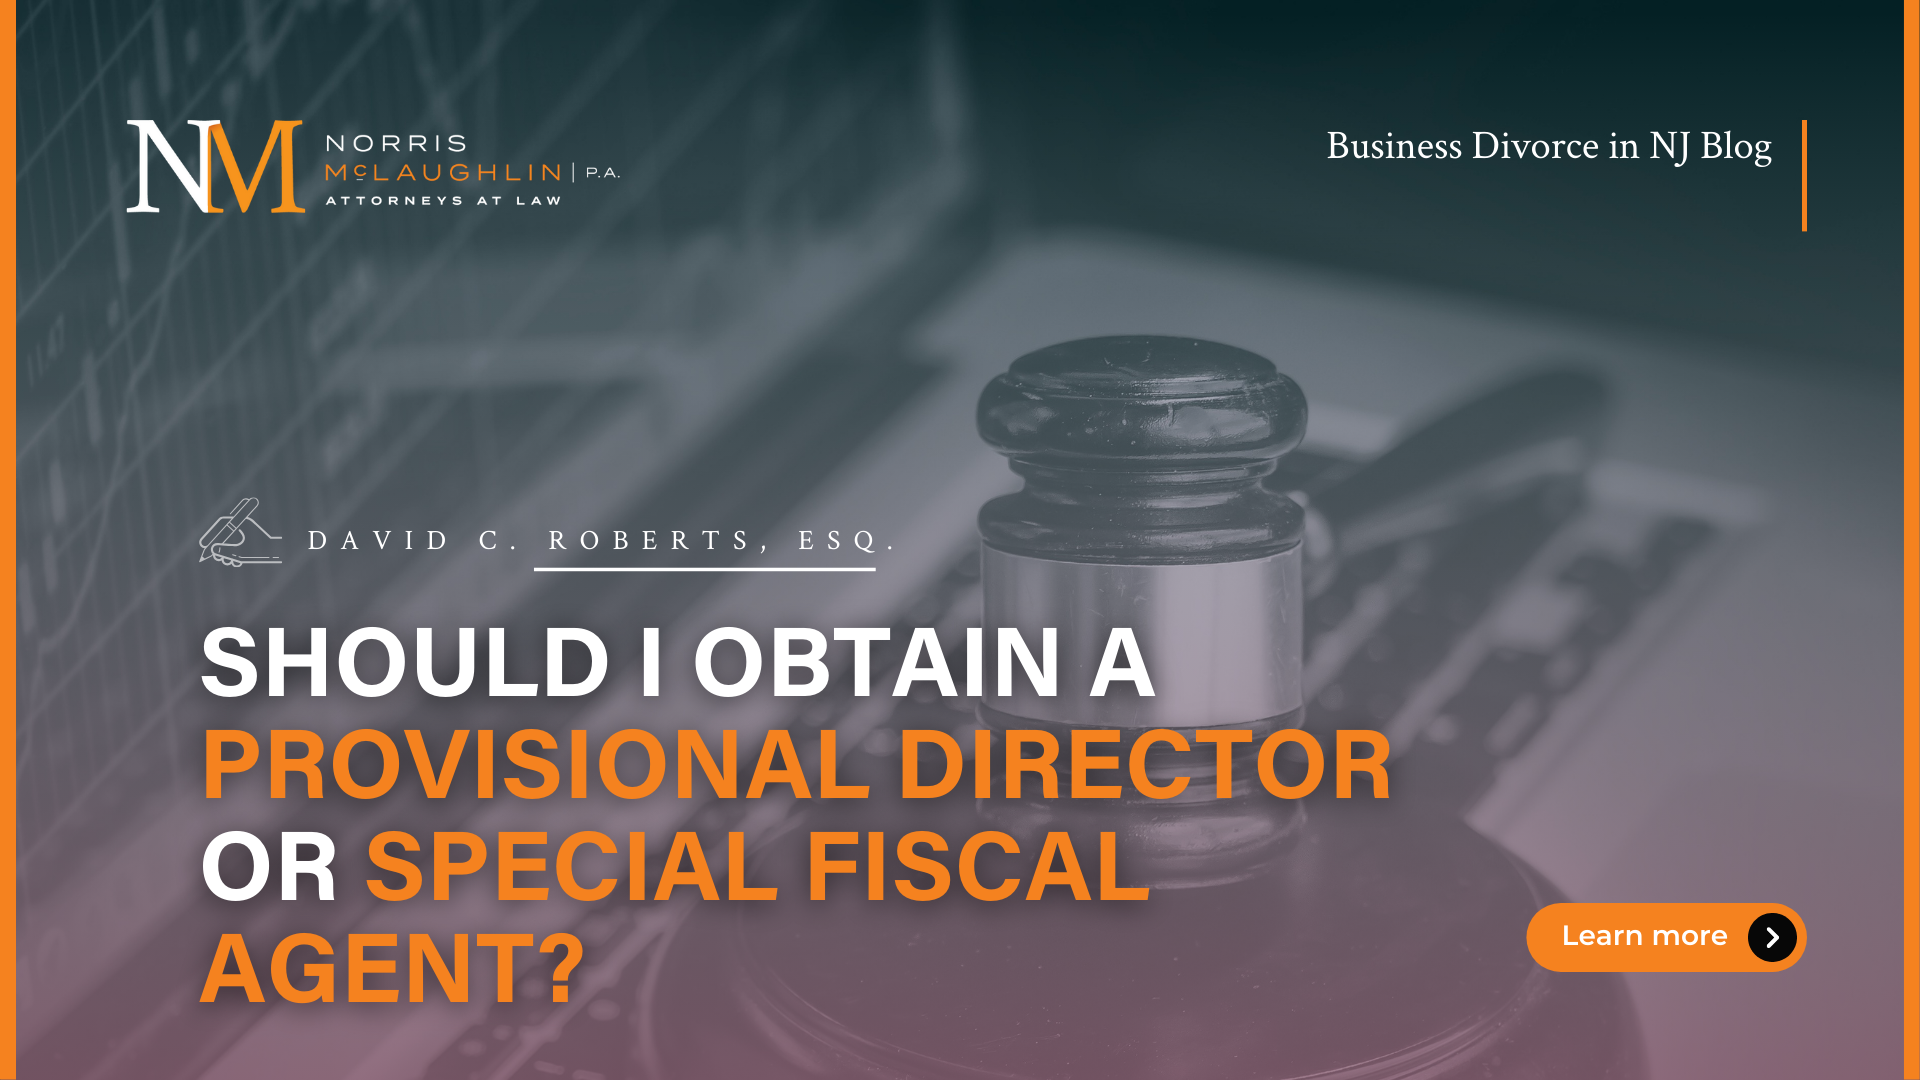 Should I Obtain a Provisional Director, or Special Fiscal Agent?